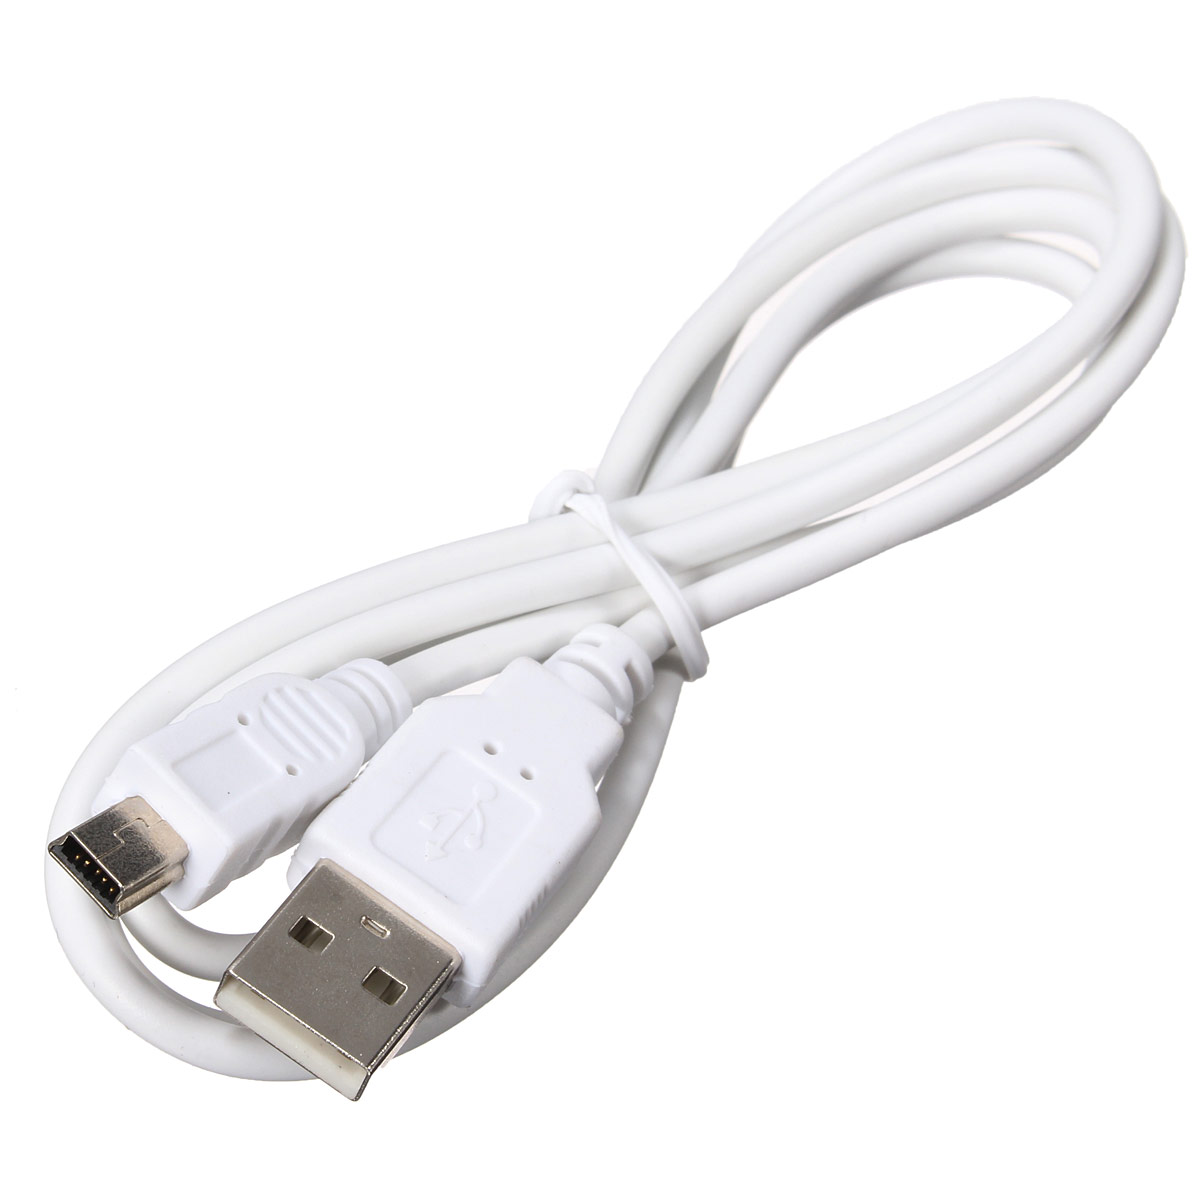 Leory Wit 1M Mini Usb Naar Usb 2.0-Kabel Data Sync Charge Kabel Voor MP3 MP4 MP5 Gps Camera